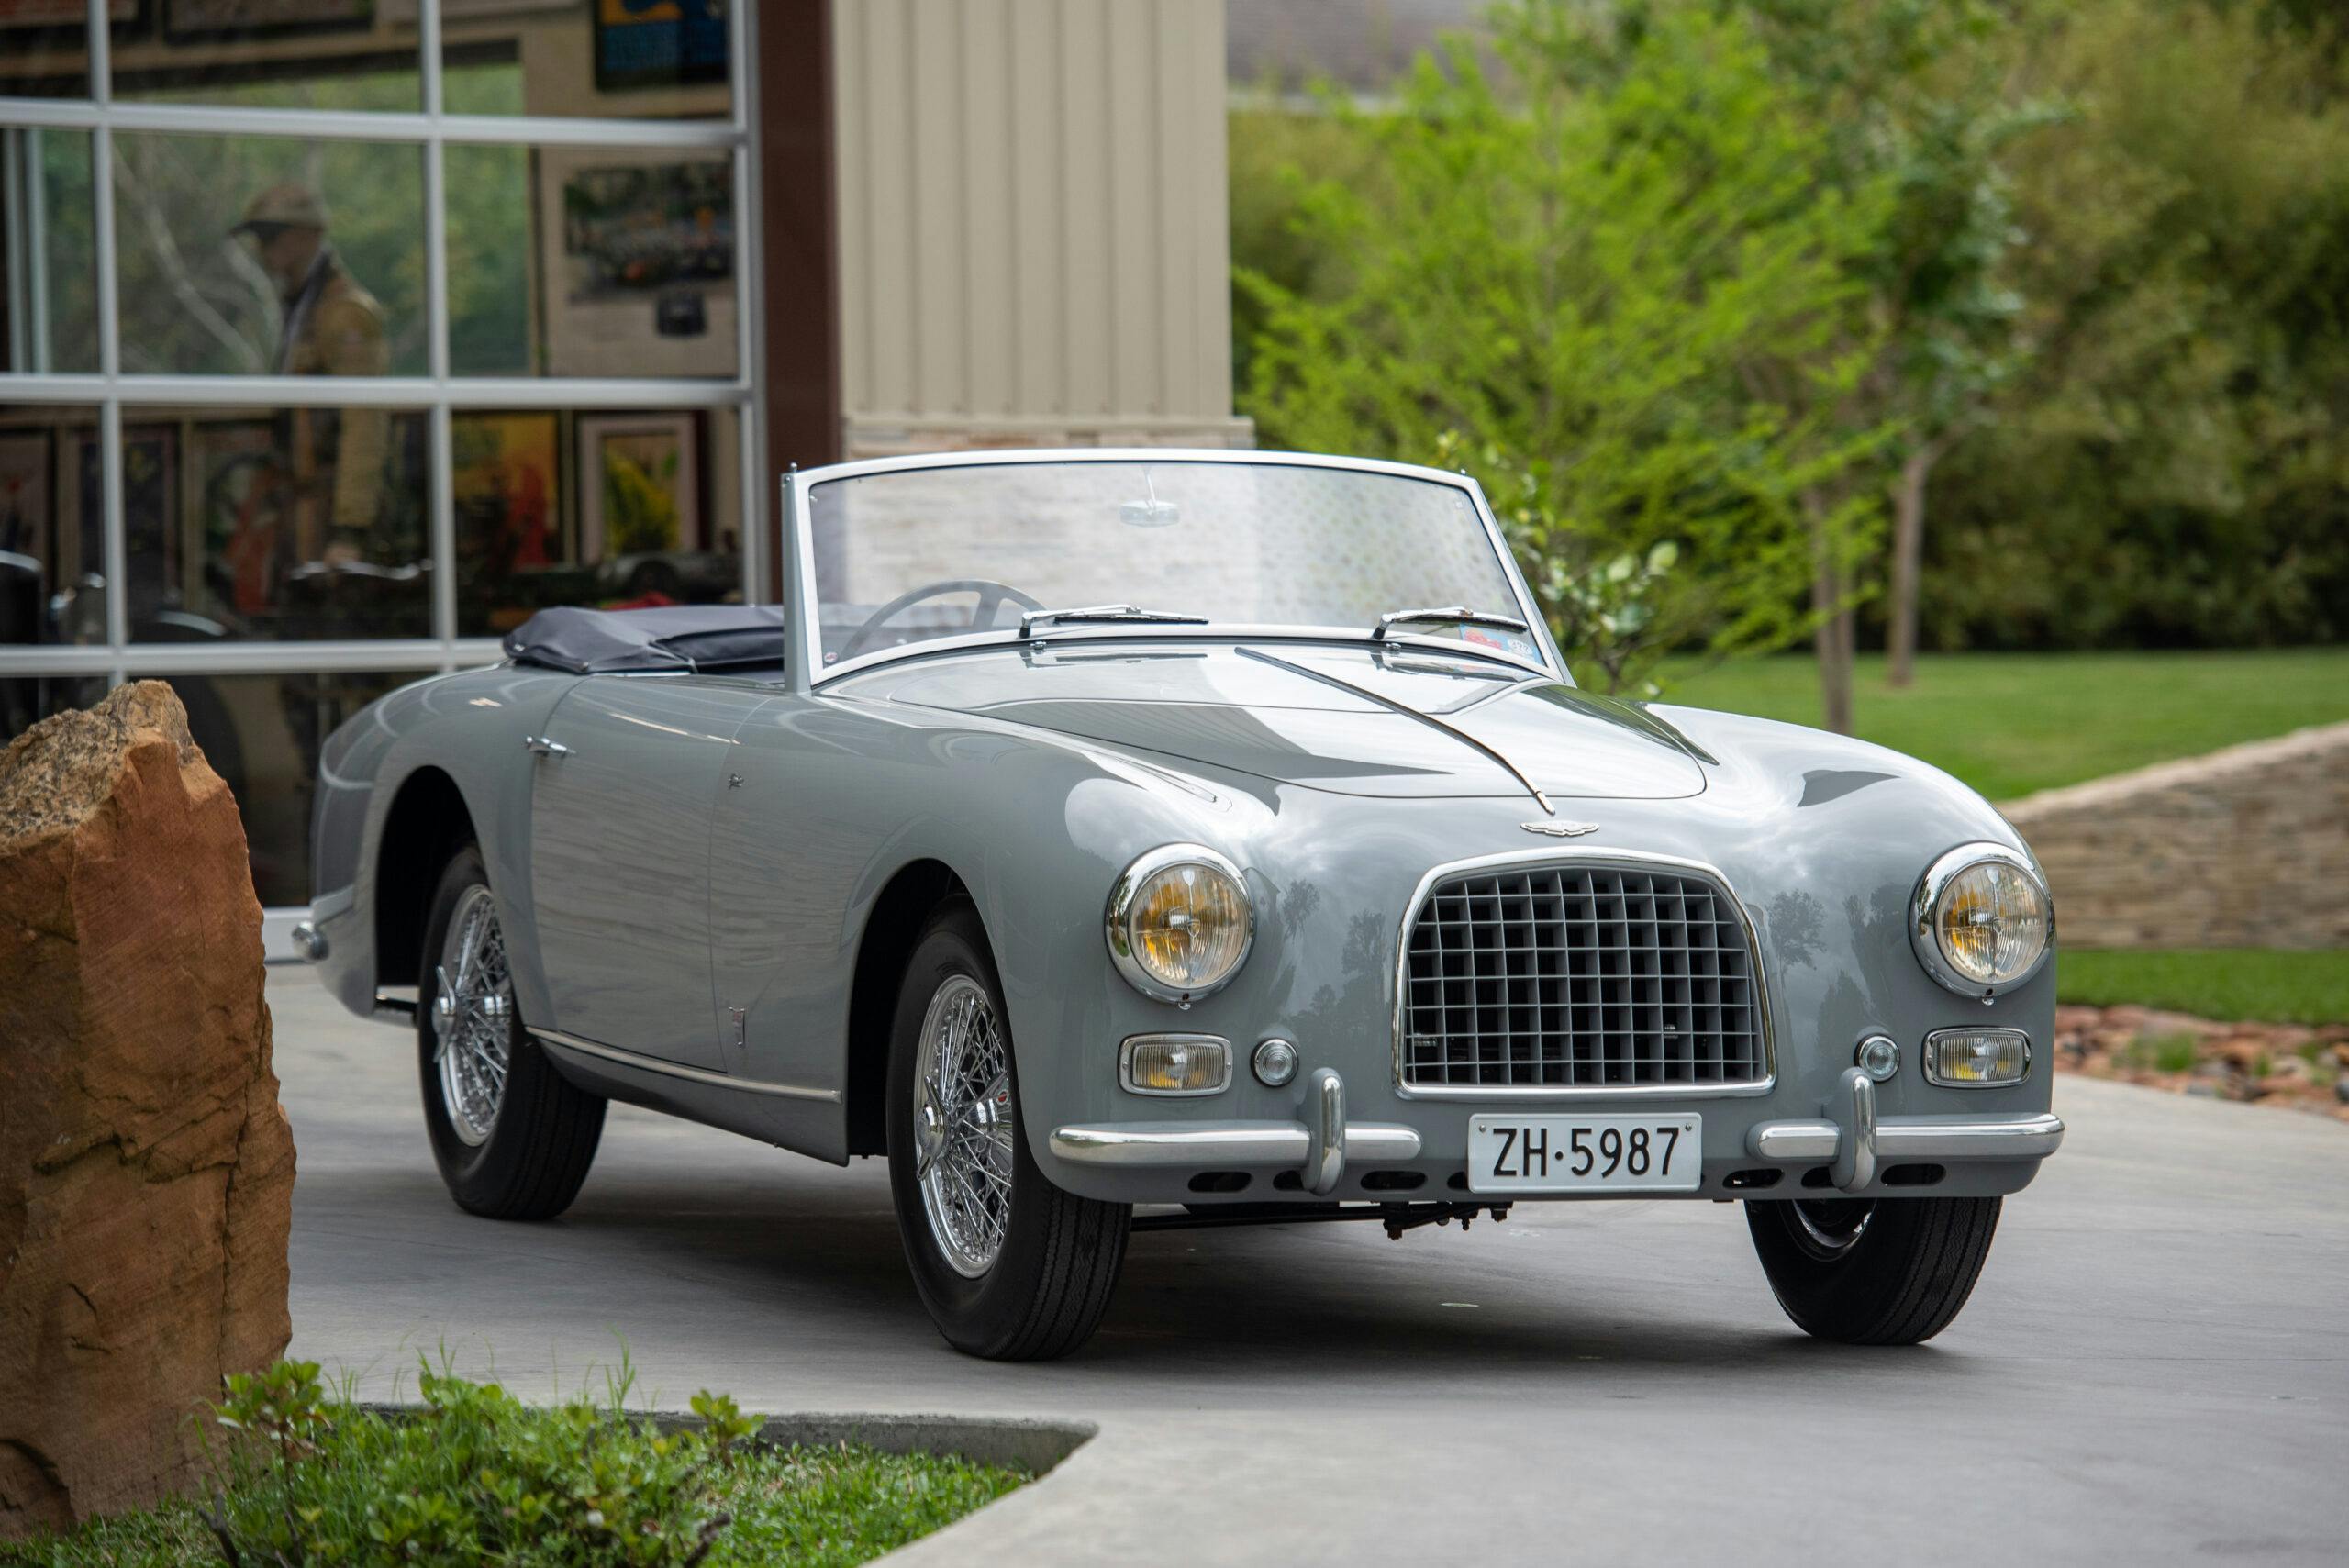 Sale of the Week: 1954 Aston Martin DB2/4 Drophead Coupe by